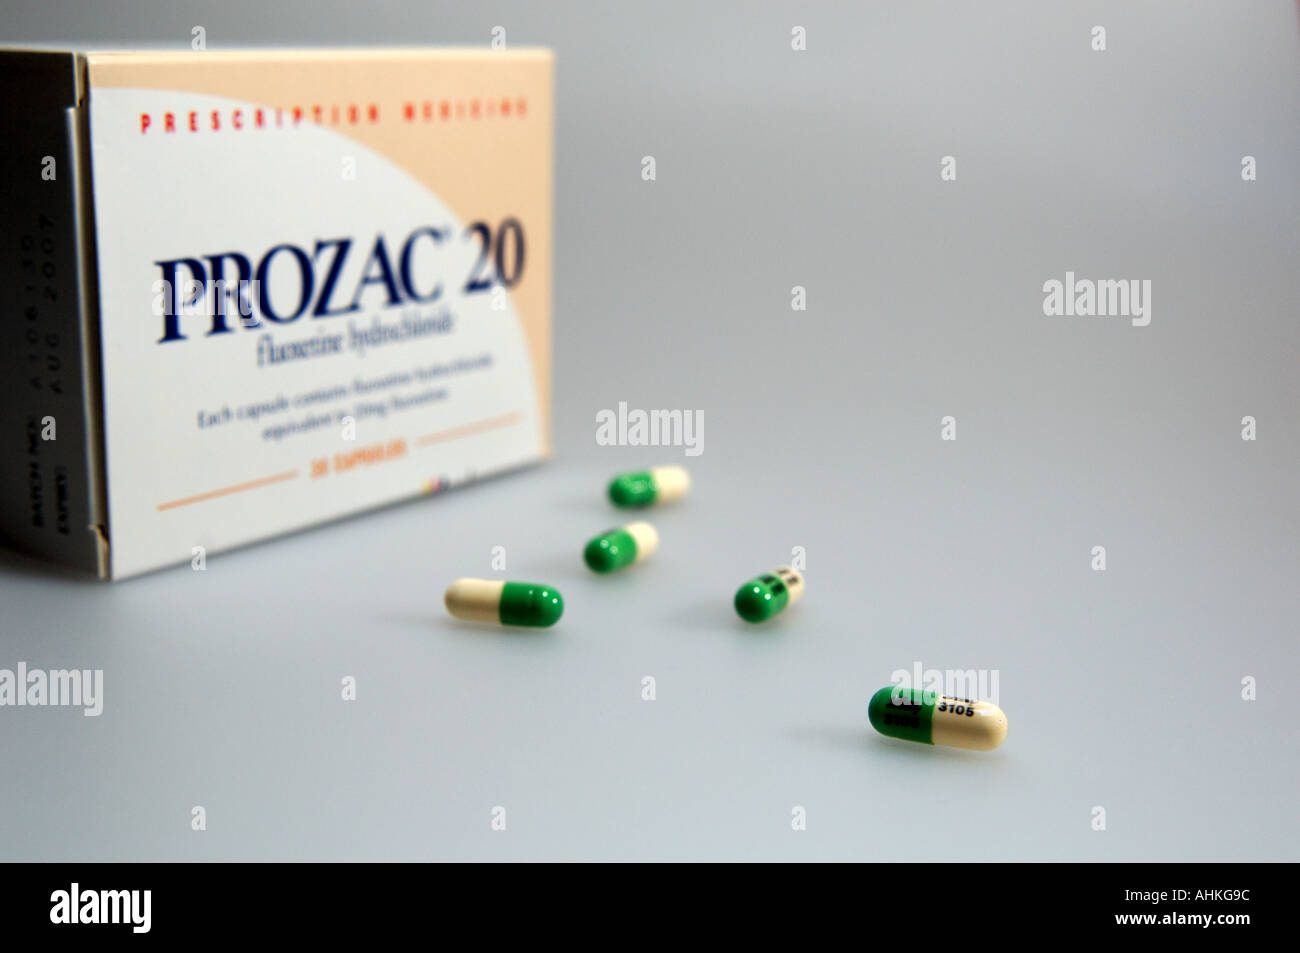 Prozac capsules and packaging anti depression medication Stock Photo